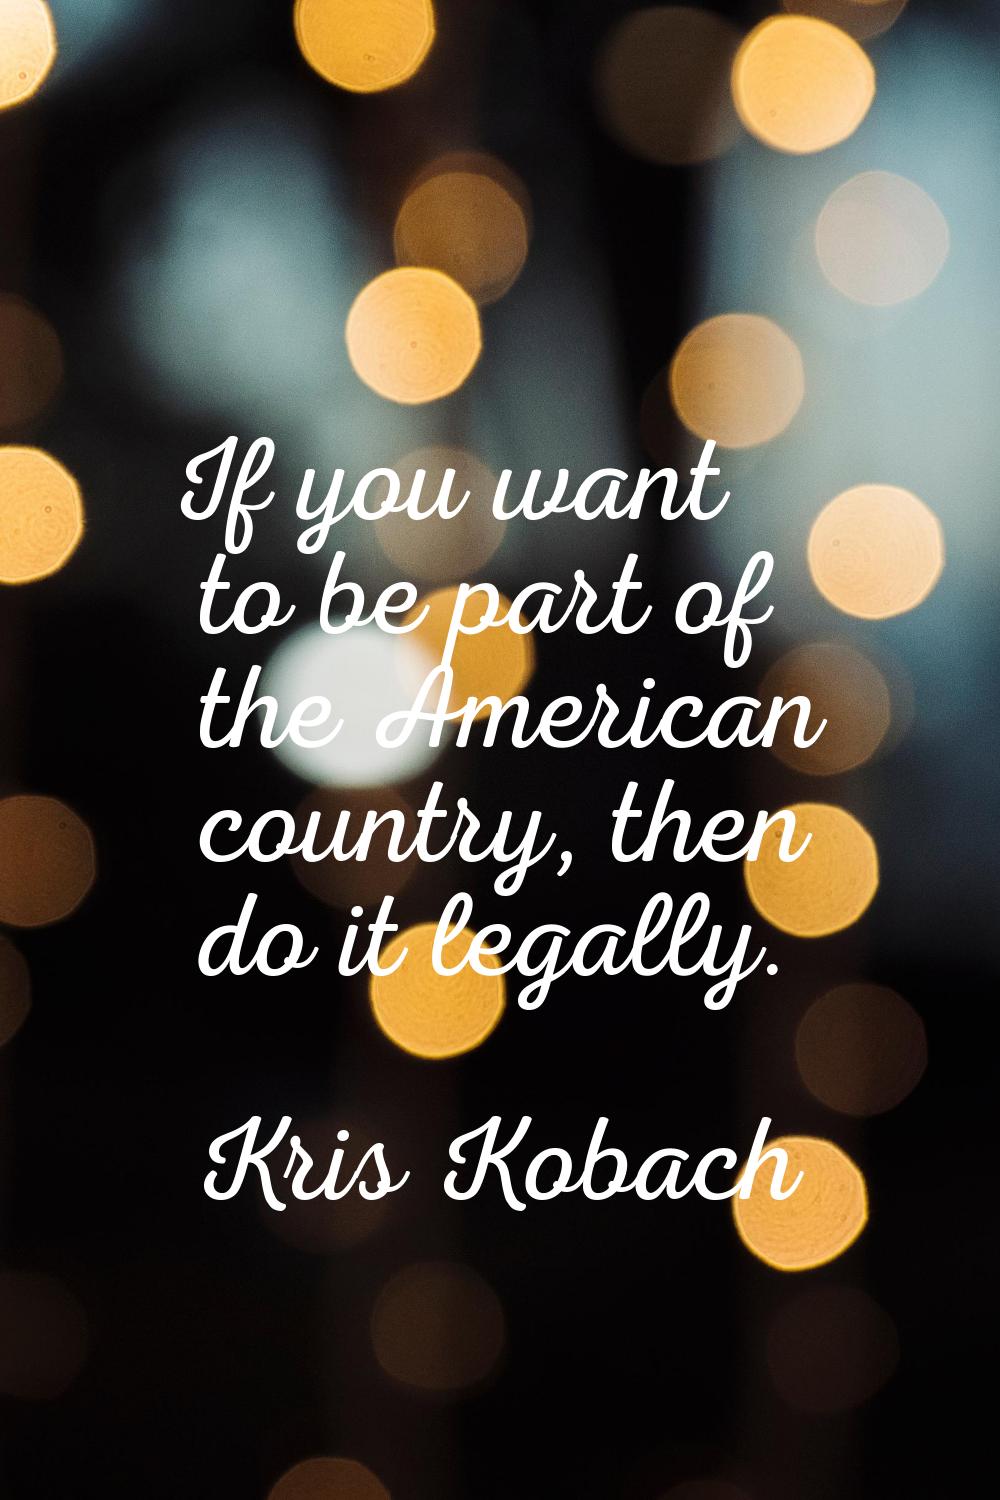 If you want to be part of the American country, then do it legally.